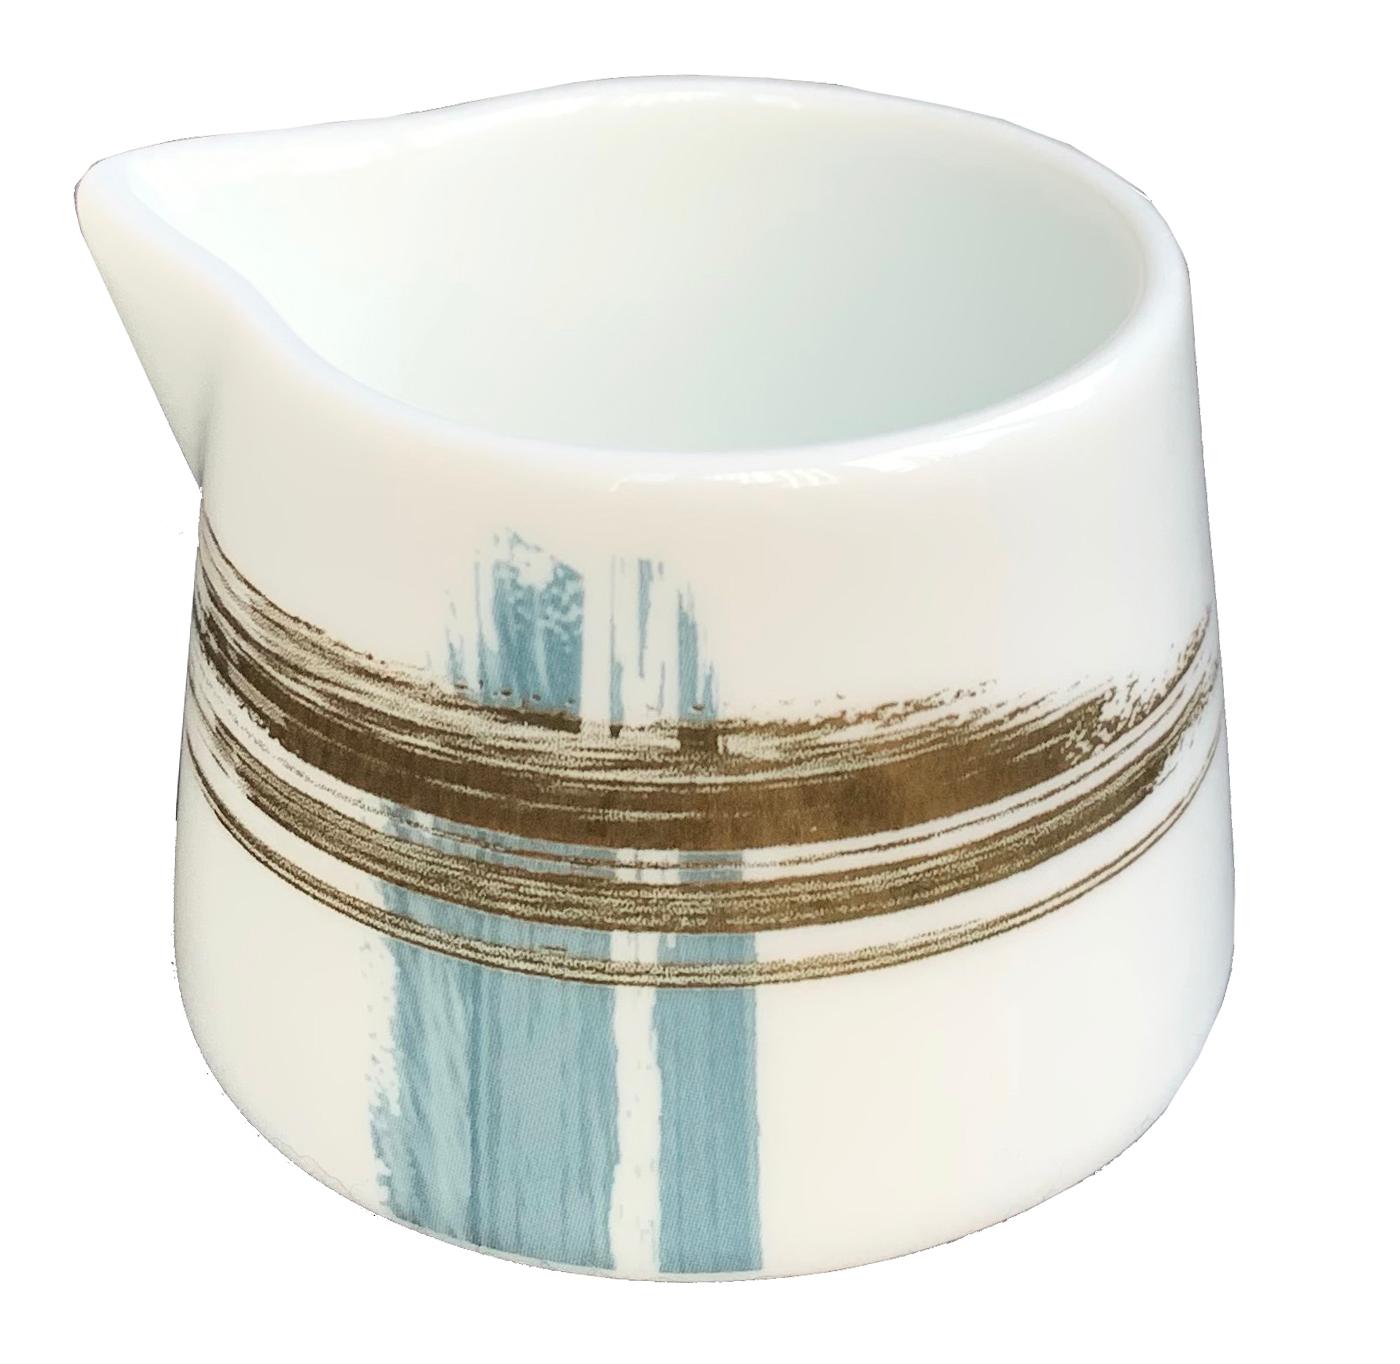 Larger quantities available upon request, with 8 weeks production time.

Description: Creamer (2 pieces)
Color: Blue and gold
Size: 6.5 x 6 x 4.5H cm, 50 ml
Material: Porcelain and gold
Collection: Artisan Brush